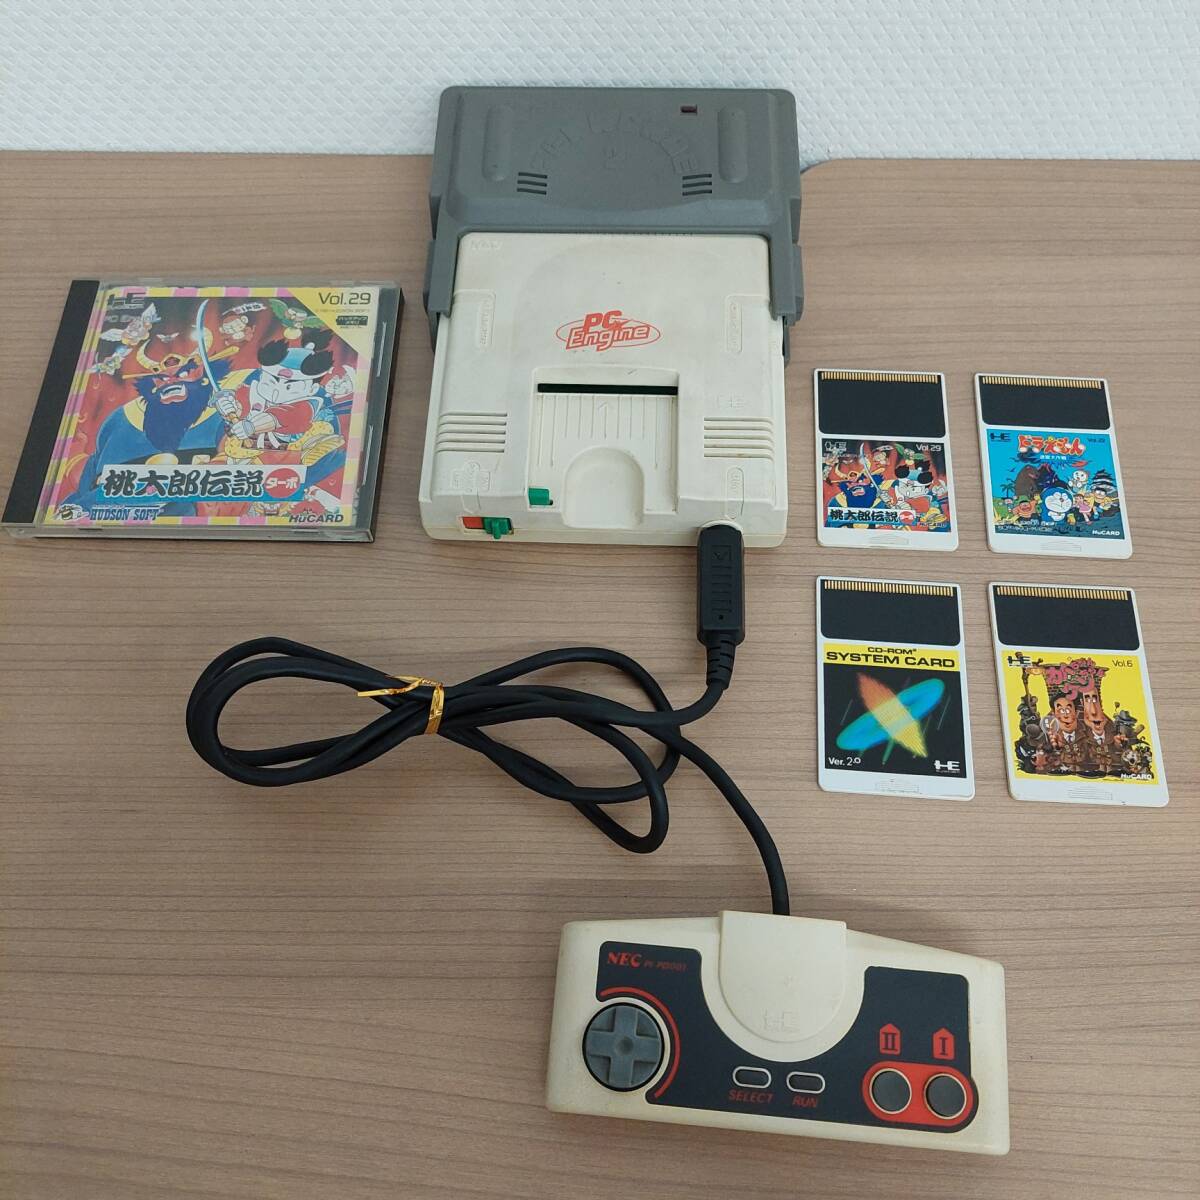 1 jpy ~ PC engine PI-TG001 body / heaven. voice 2 HC66-6/ controller PI-PD001/kato Chan ticket Chan peach Taro legend other set electrification only No.6583-1